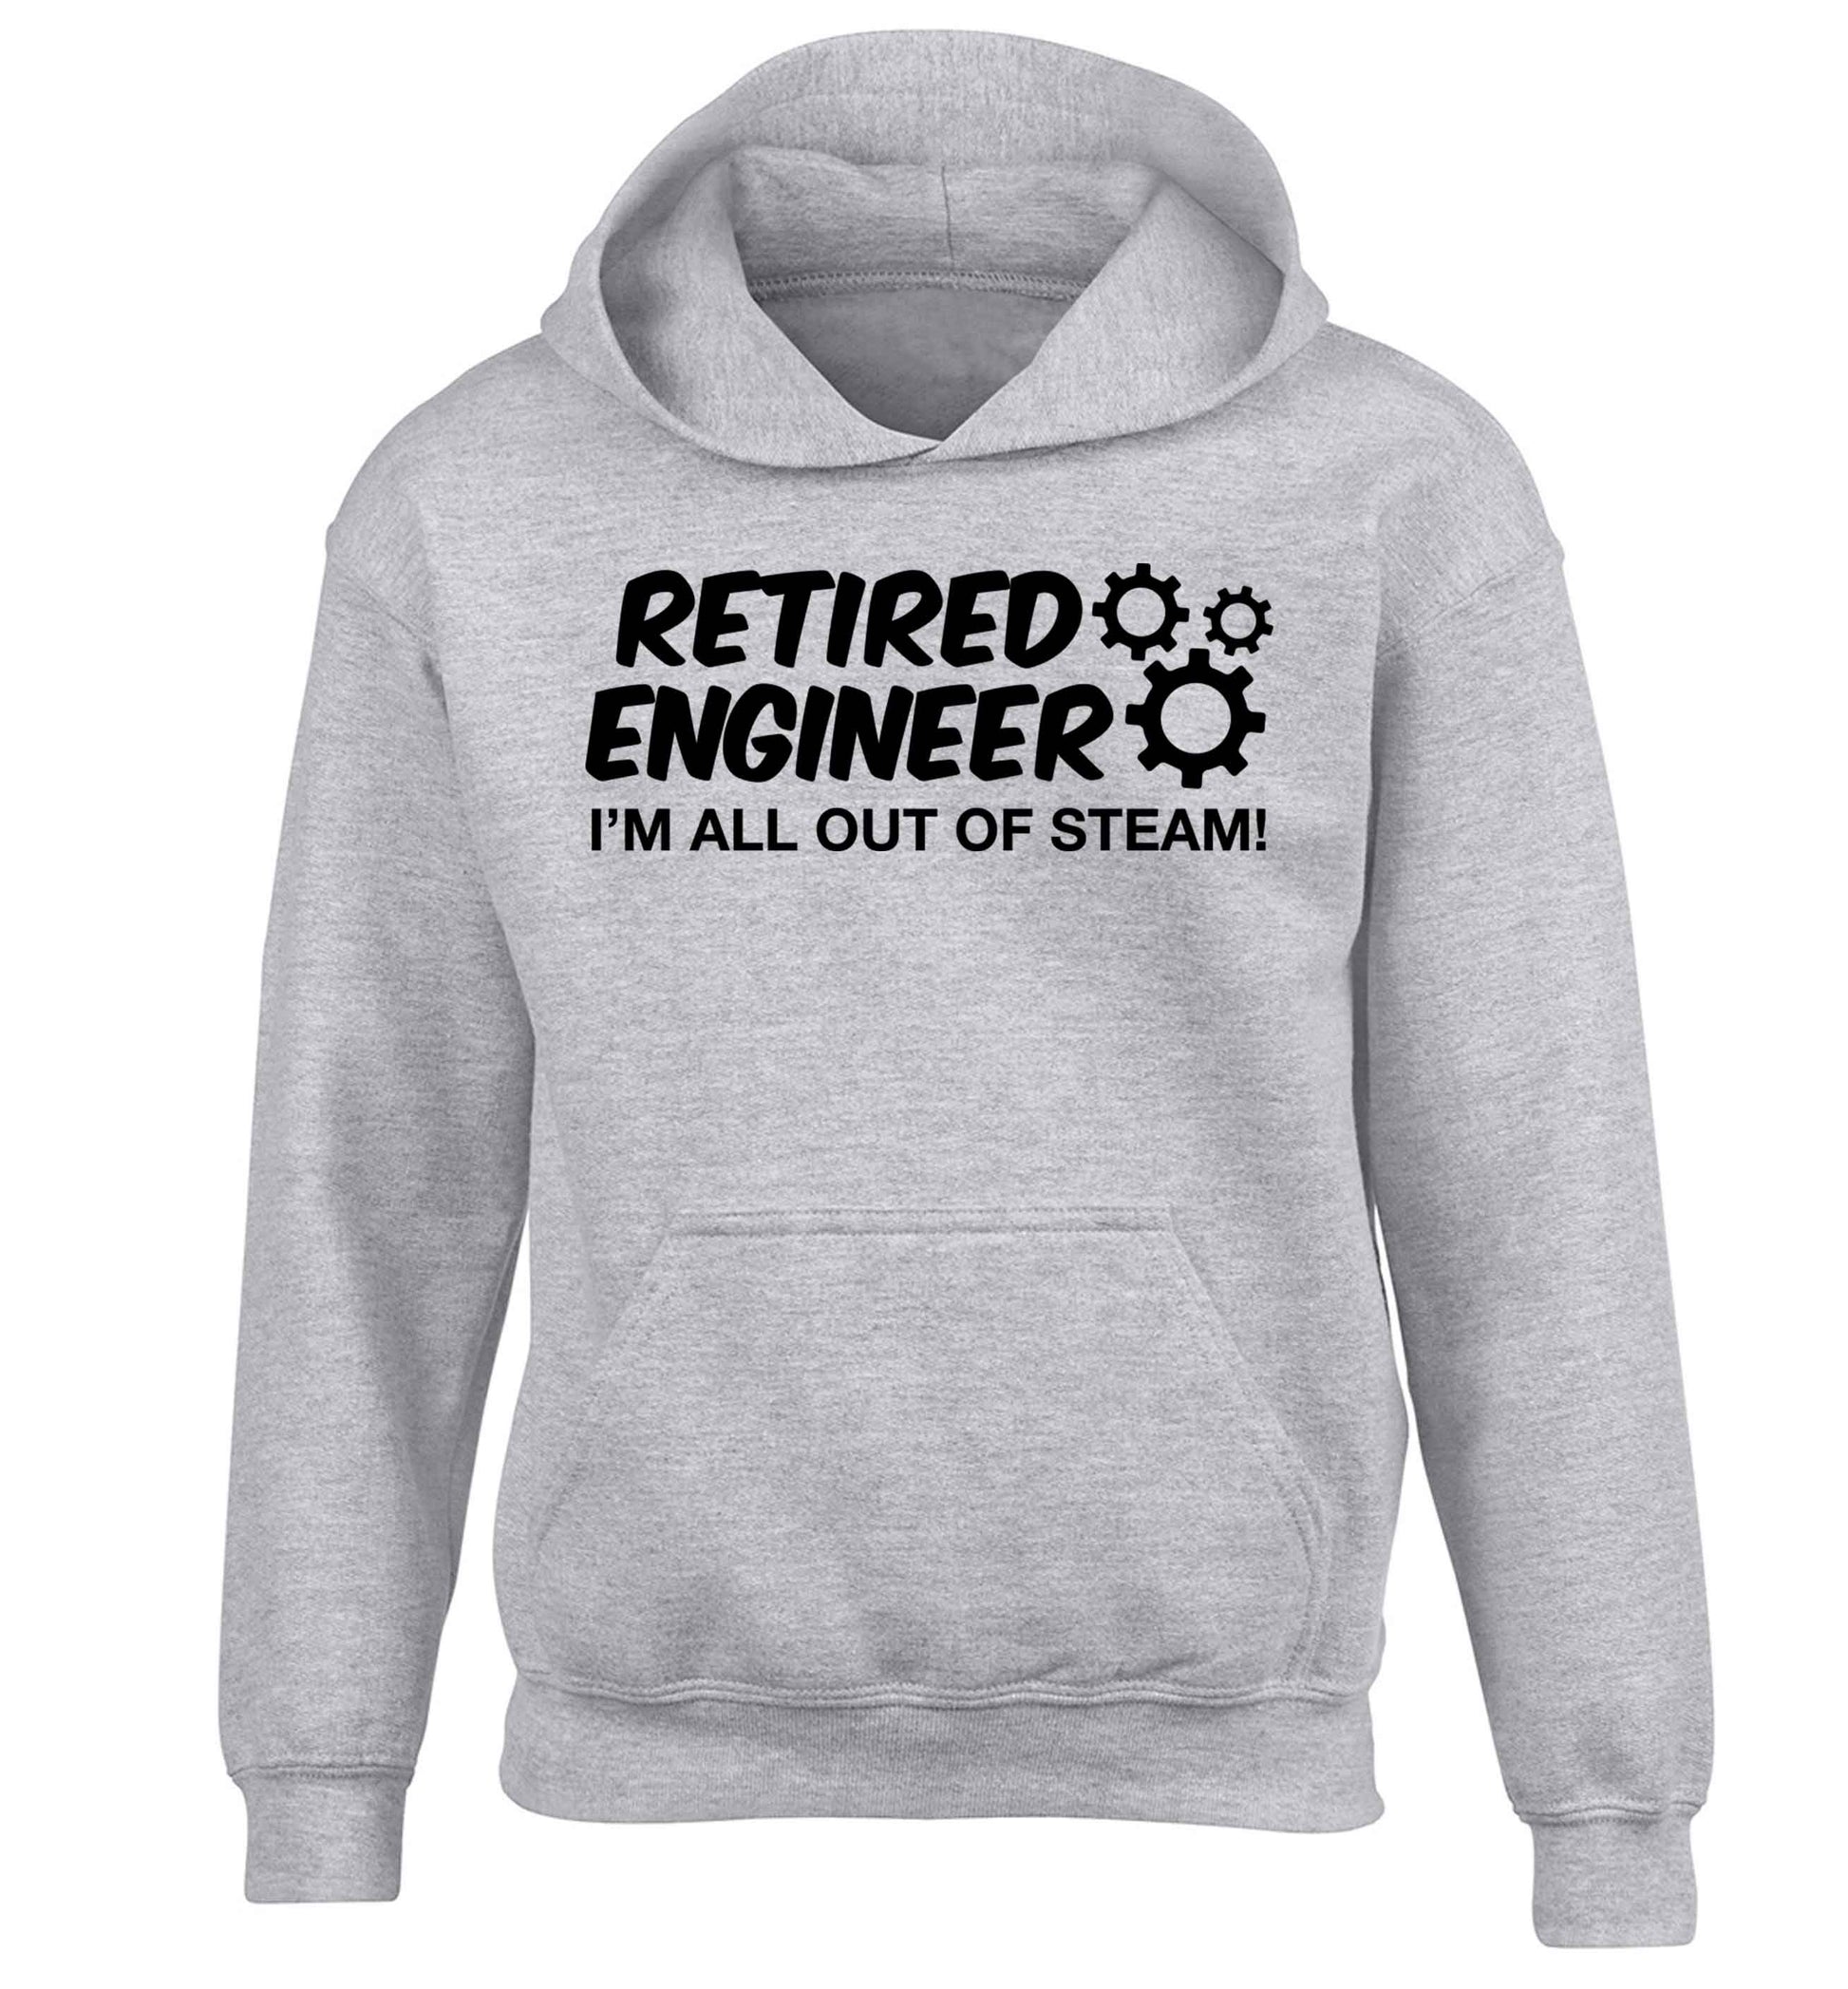 Retired engineer I'm all out of steam children's grey hoodie 12-13 Years